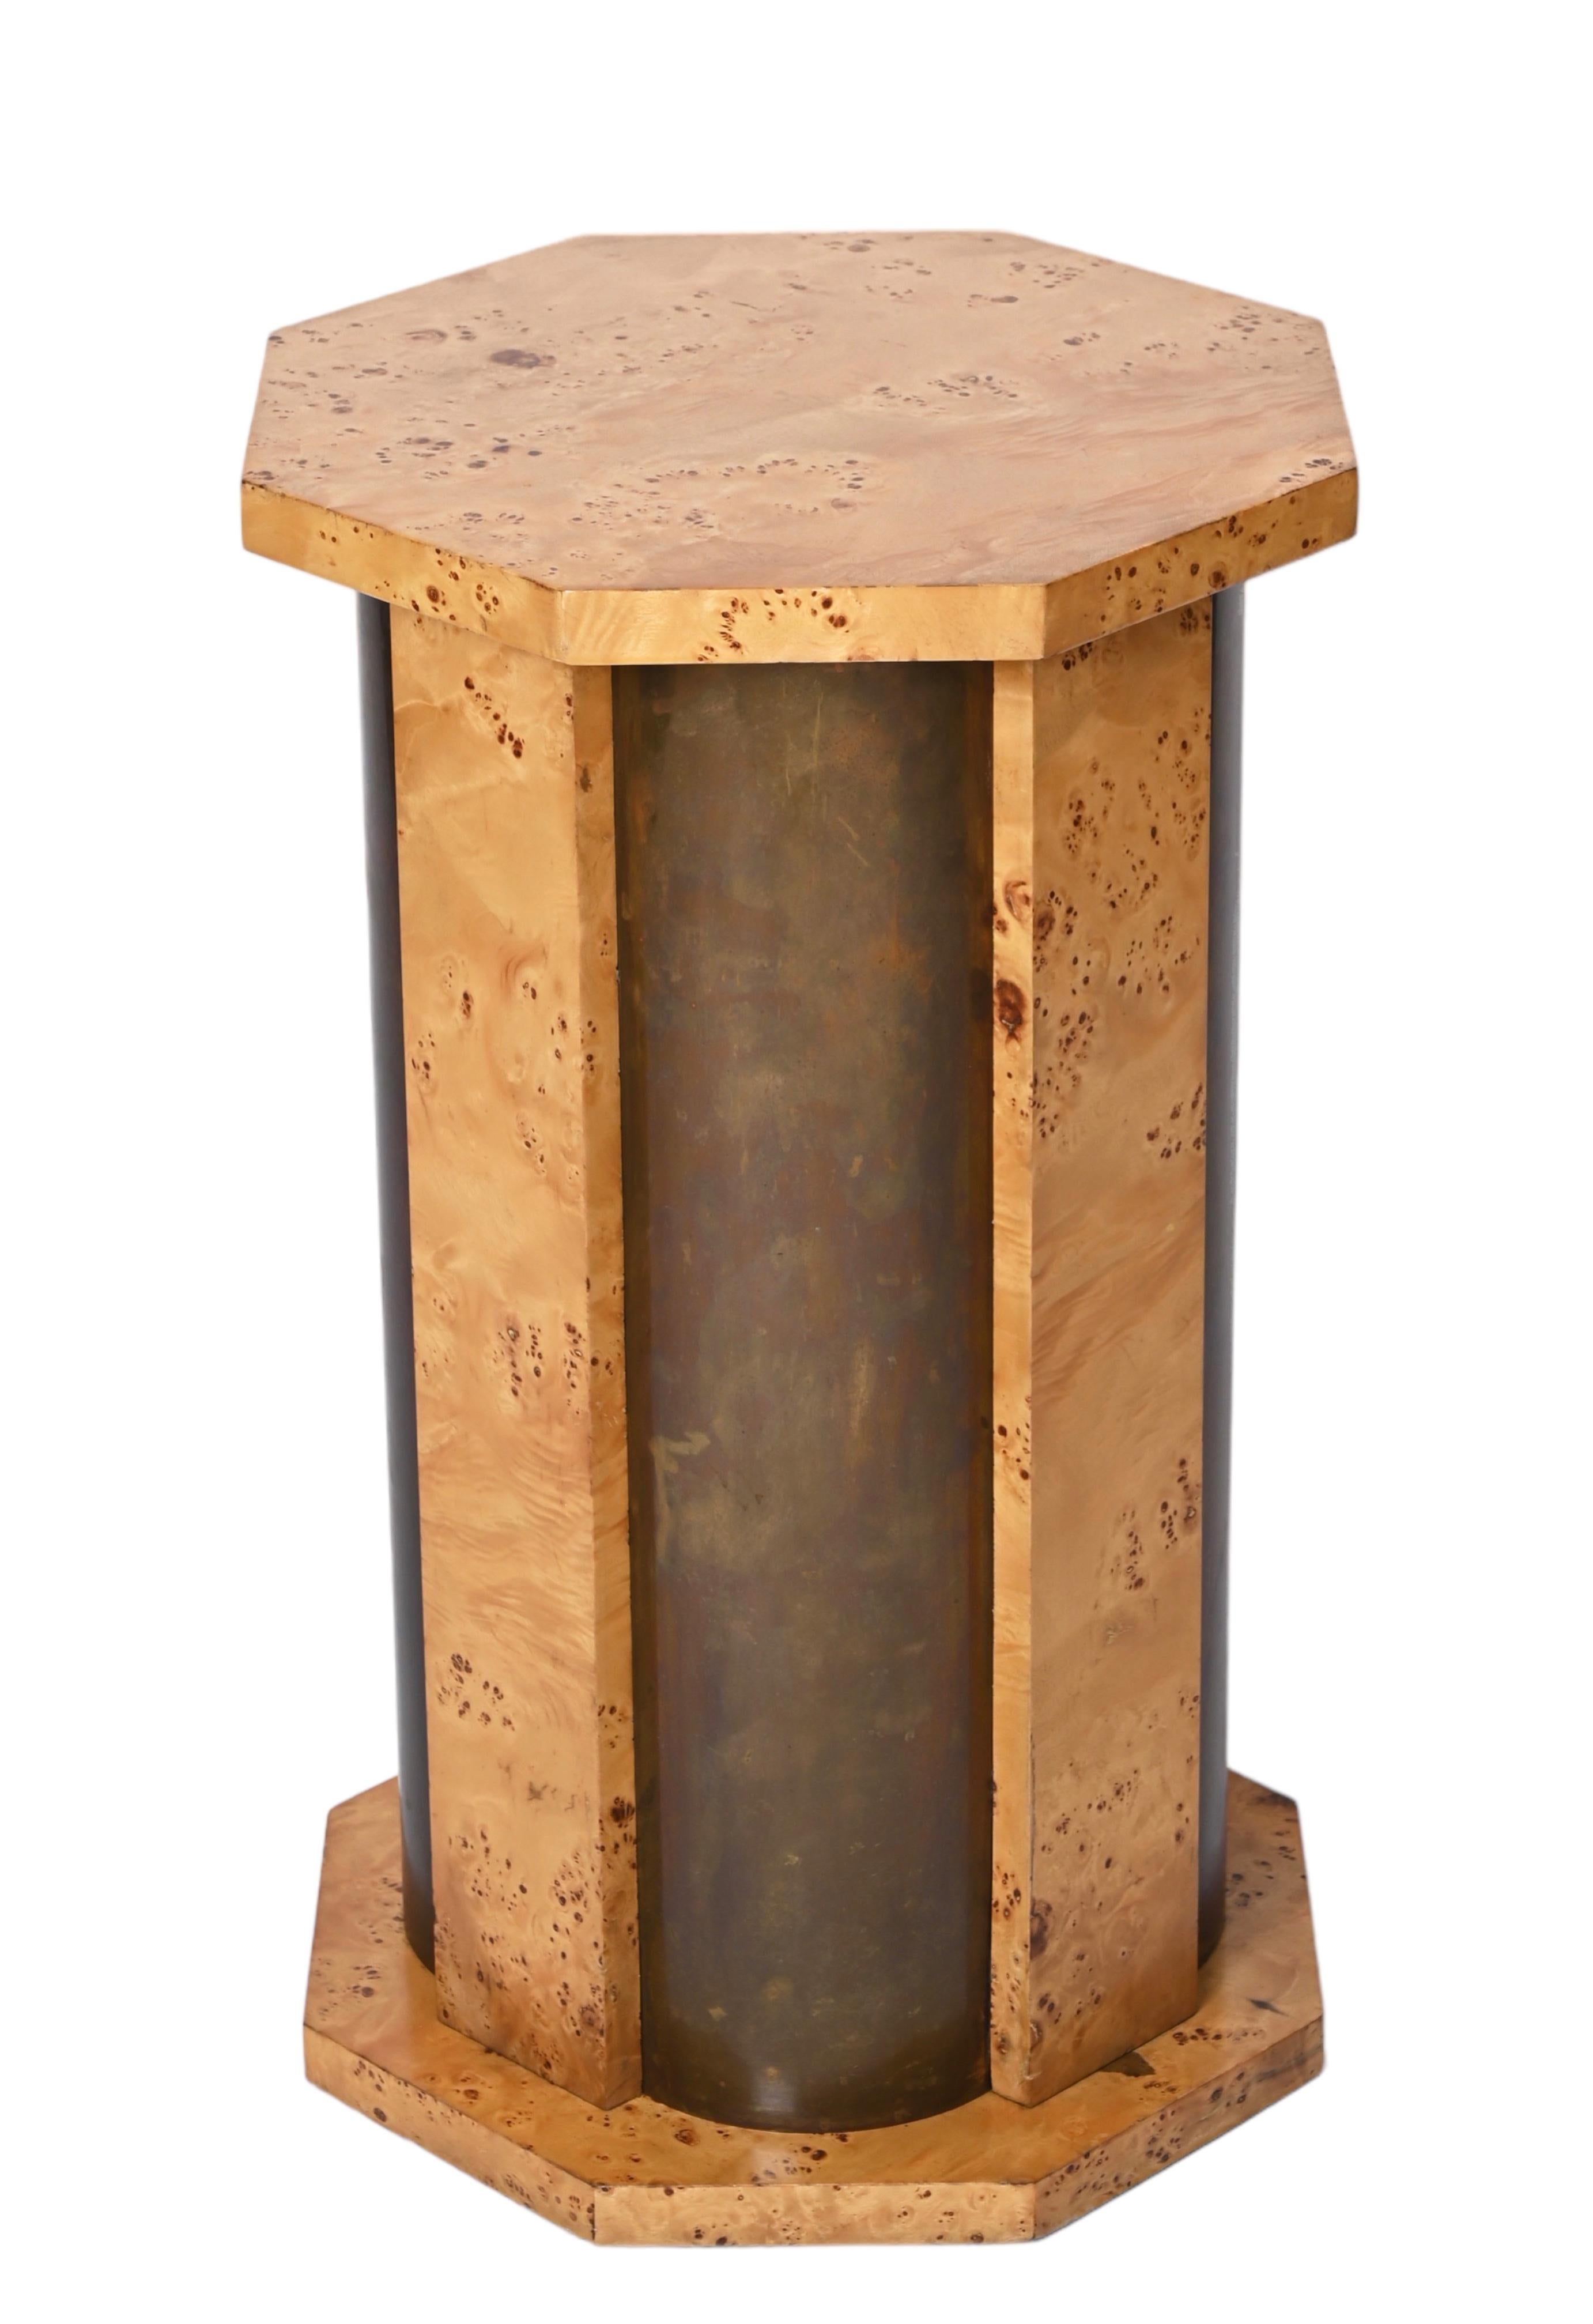 Tommaso Barbi Octagonal Table Pedestal in Burl Wood and Brass, Italy, 1970 For Sale 6